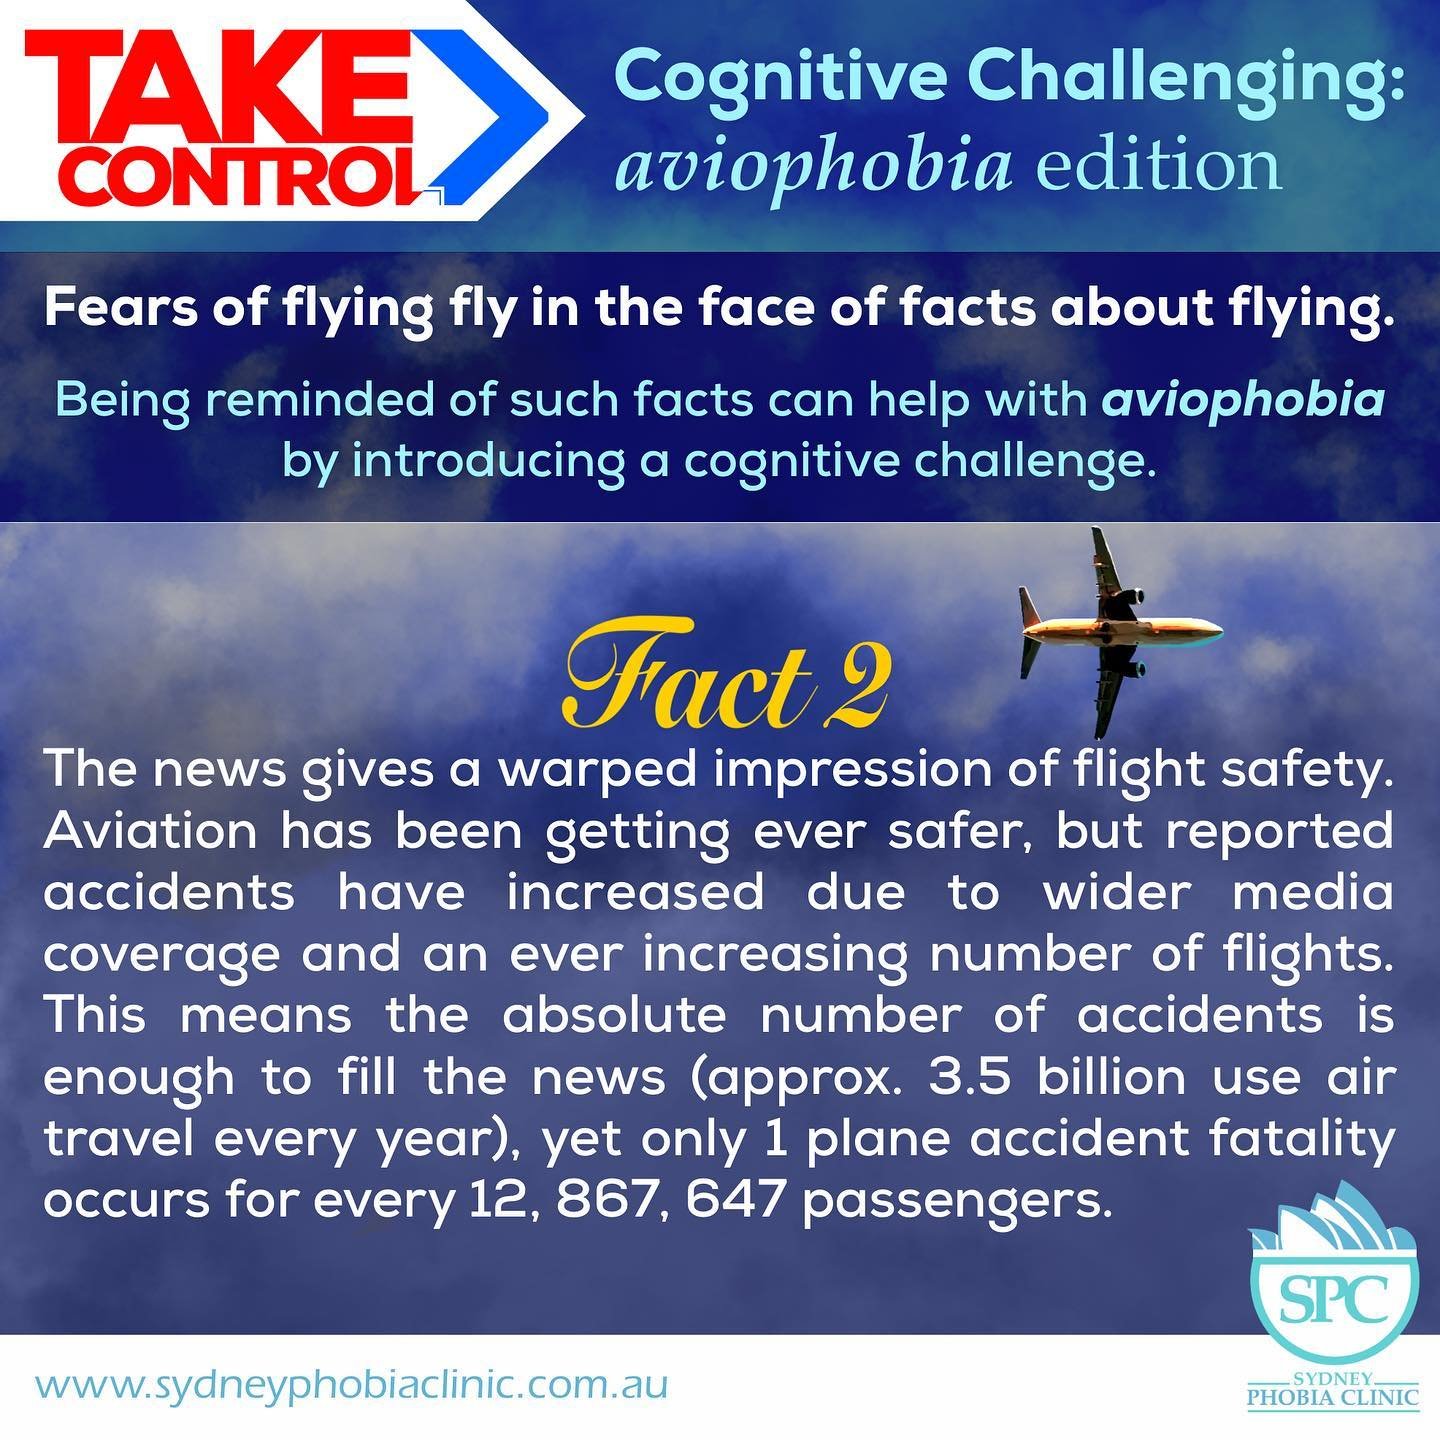 Cognitive Challenging: Aviophobia Edition
Fears of flying fly in the face of facts about flying. Being reminded of such facts can help with aviophobia by introducing a cognitive challenge.

Fact 2:
‪The news gives a warped impression of flight safety